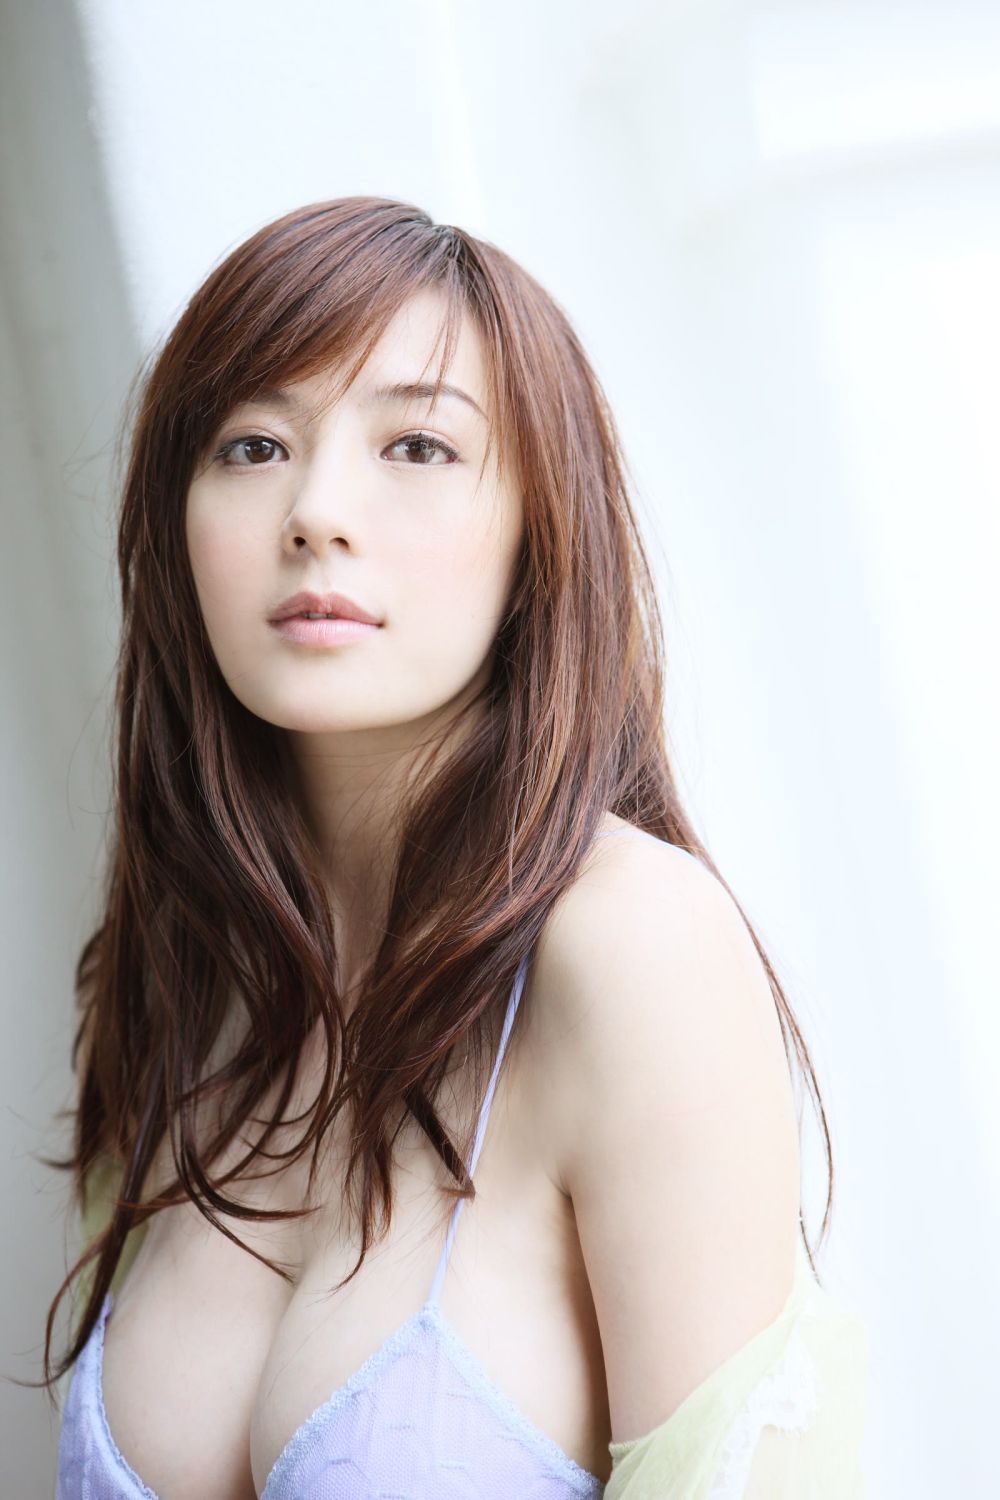 Weitong Zhou Sexy and Hottest Photos , Latest Pics